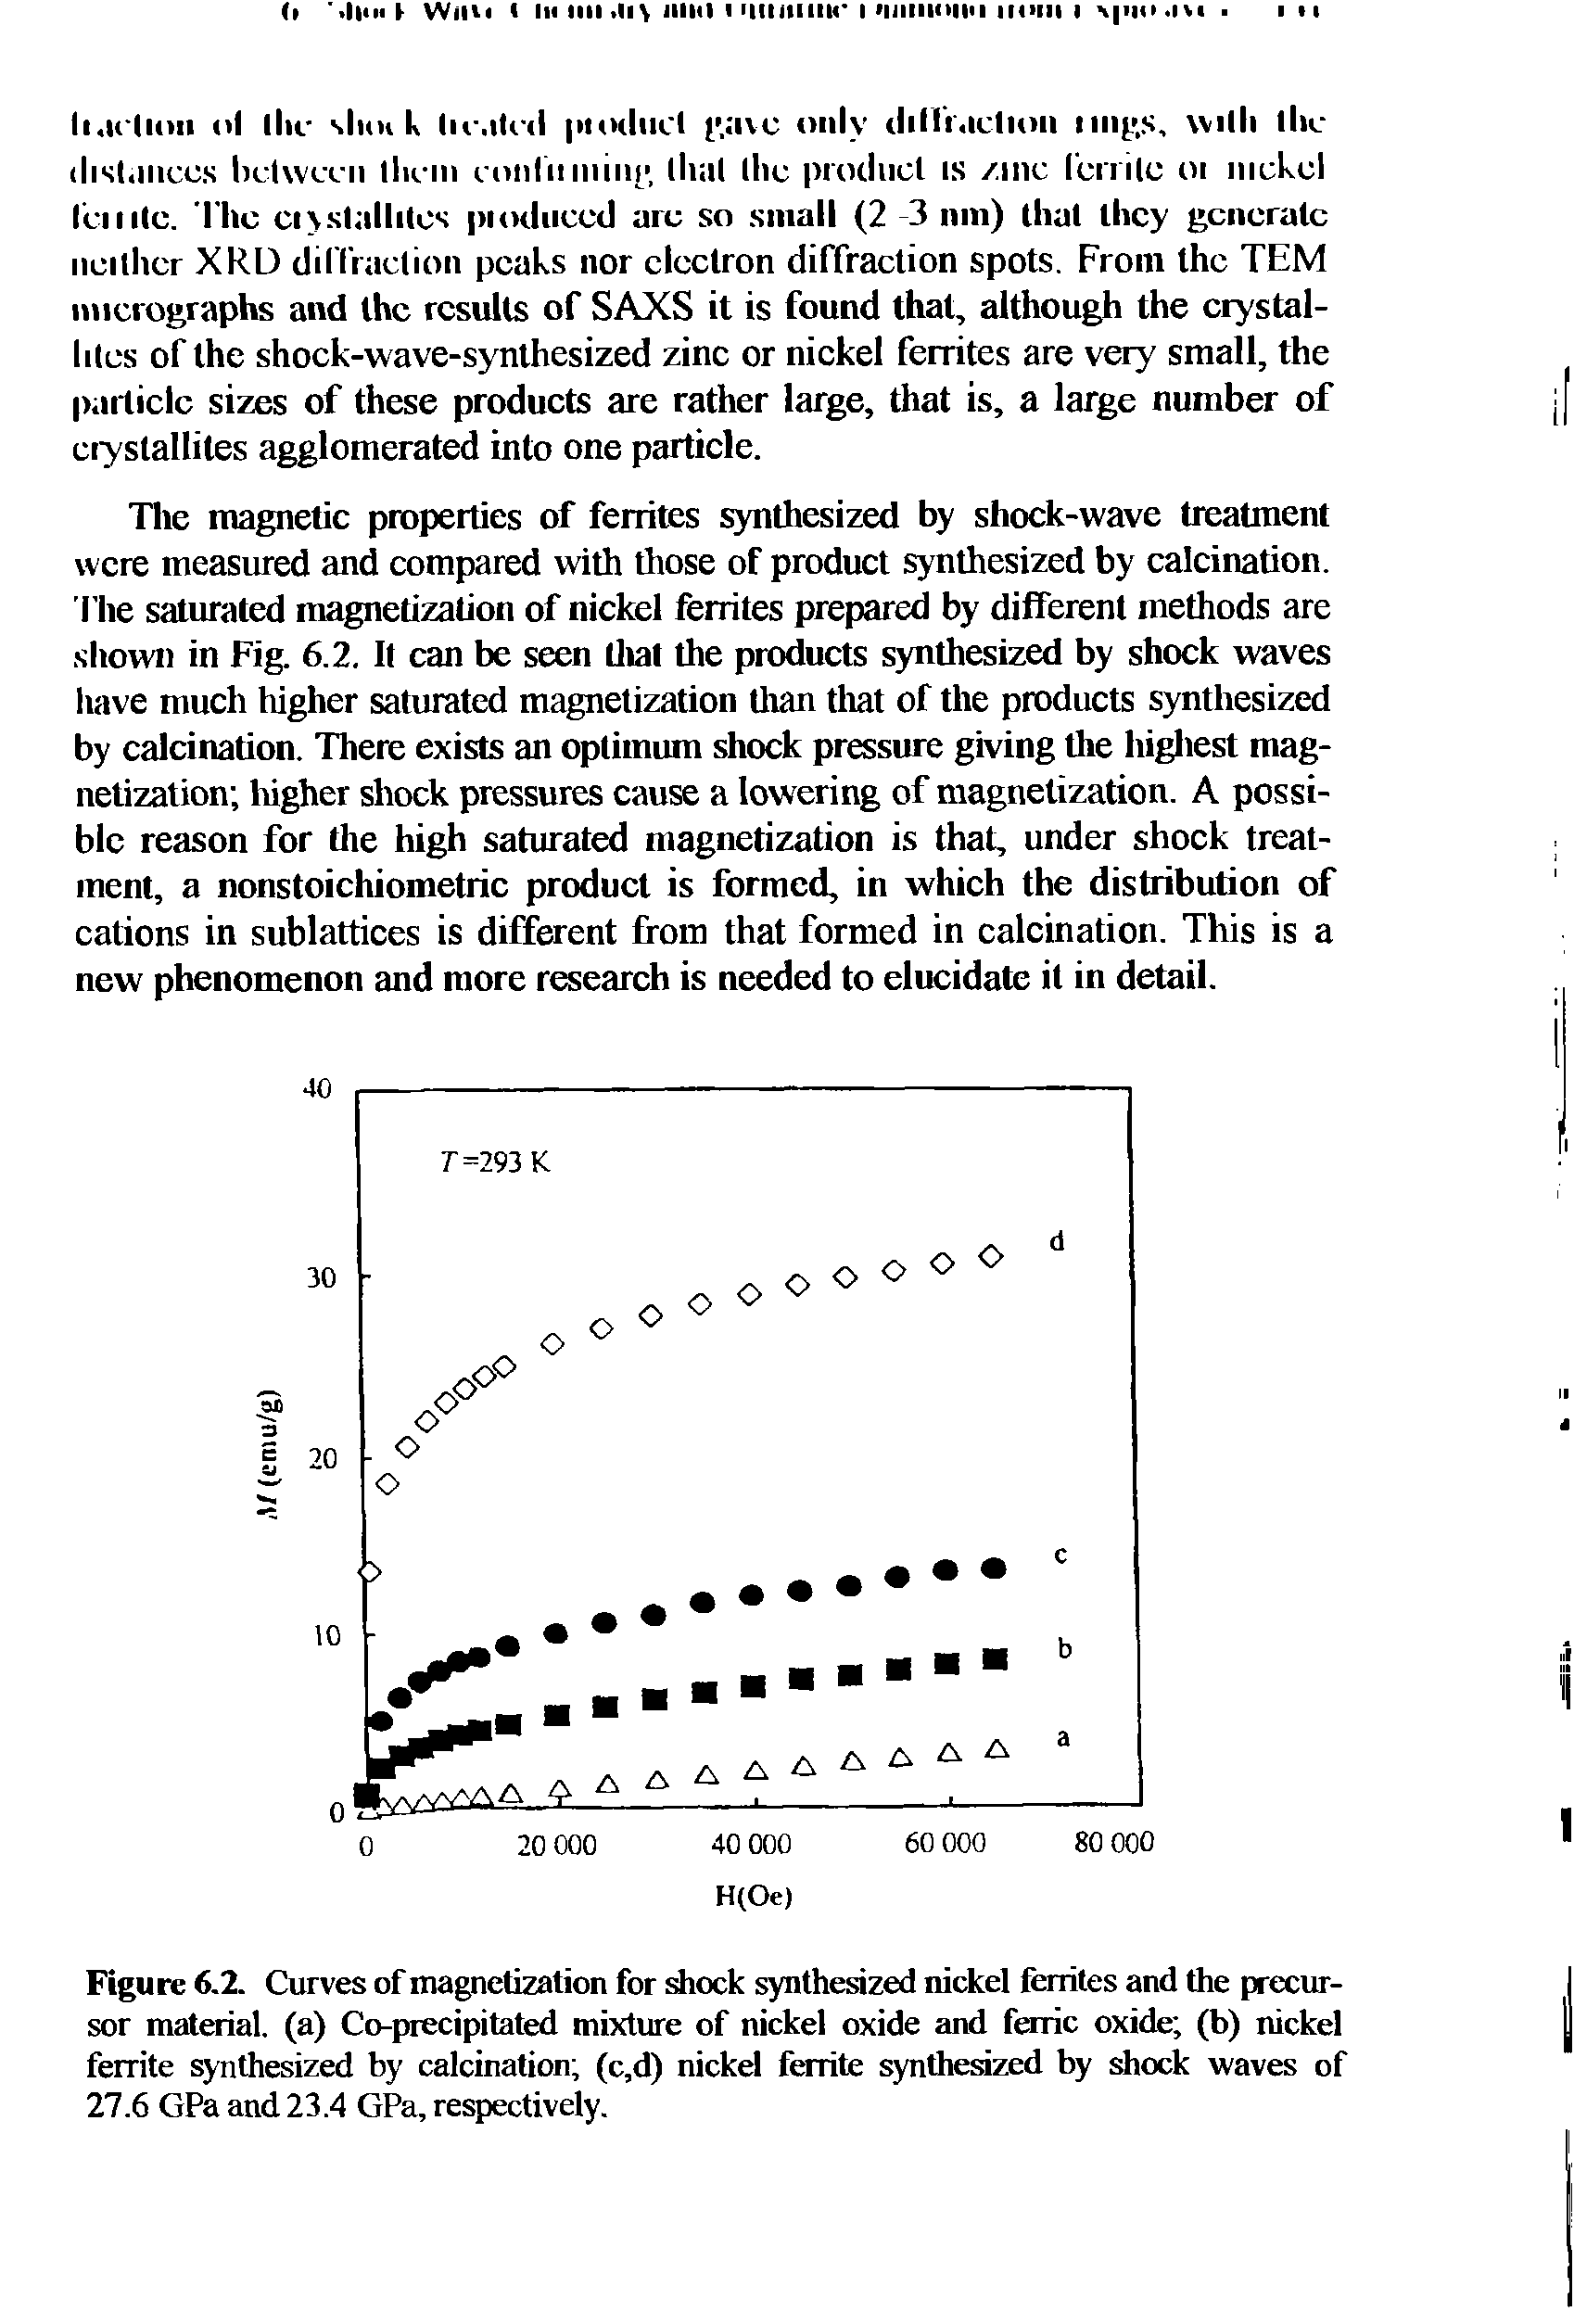 Figure 6.2. Curves of magnetization for shock synthesized nickel ferrites and the precursor material, (a) Co-precipitated mixture of nickel oxide and ferric oxide (b) nickel ferrite synthesized by calcination (c,d) nickel ferrite synthesized by shock waves of 27.6 GPa and 23.4 GPa, respectively.